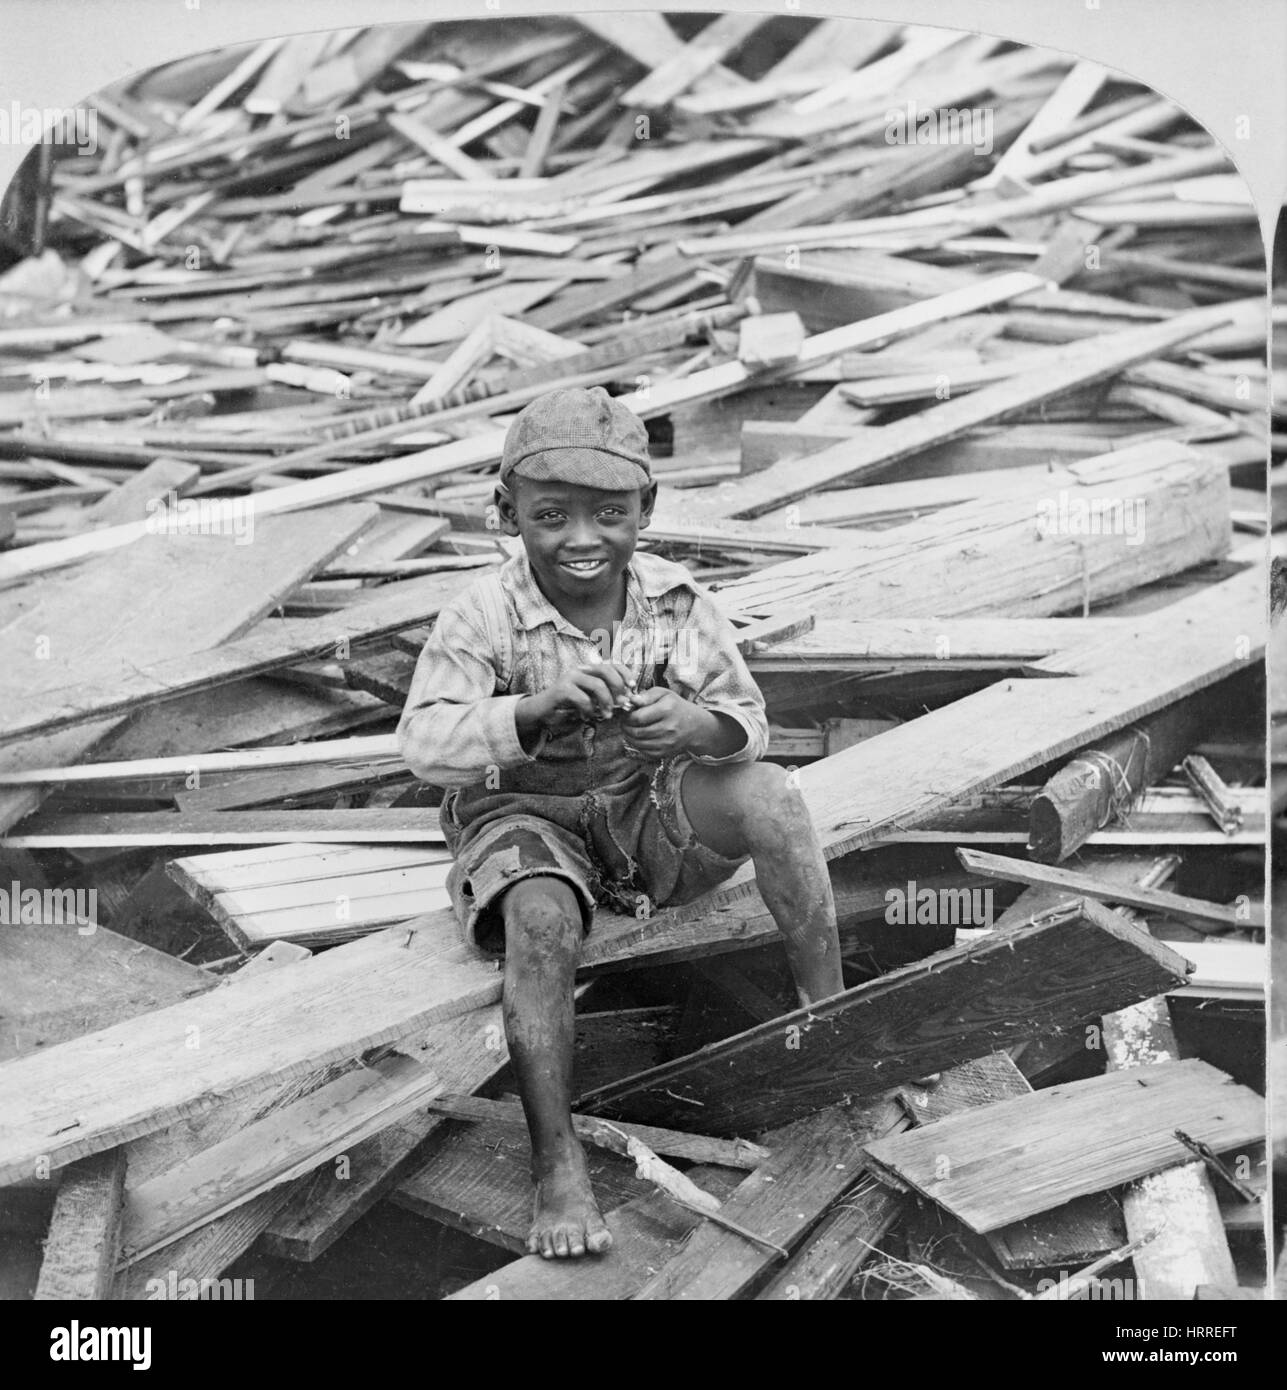 Portrait of Young Boy Sitting on Pile of Debris after Hurricane, Galveston, Texas, USA, Single Image of Stereo Card, 1900 Stock Photo